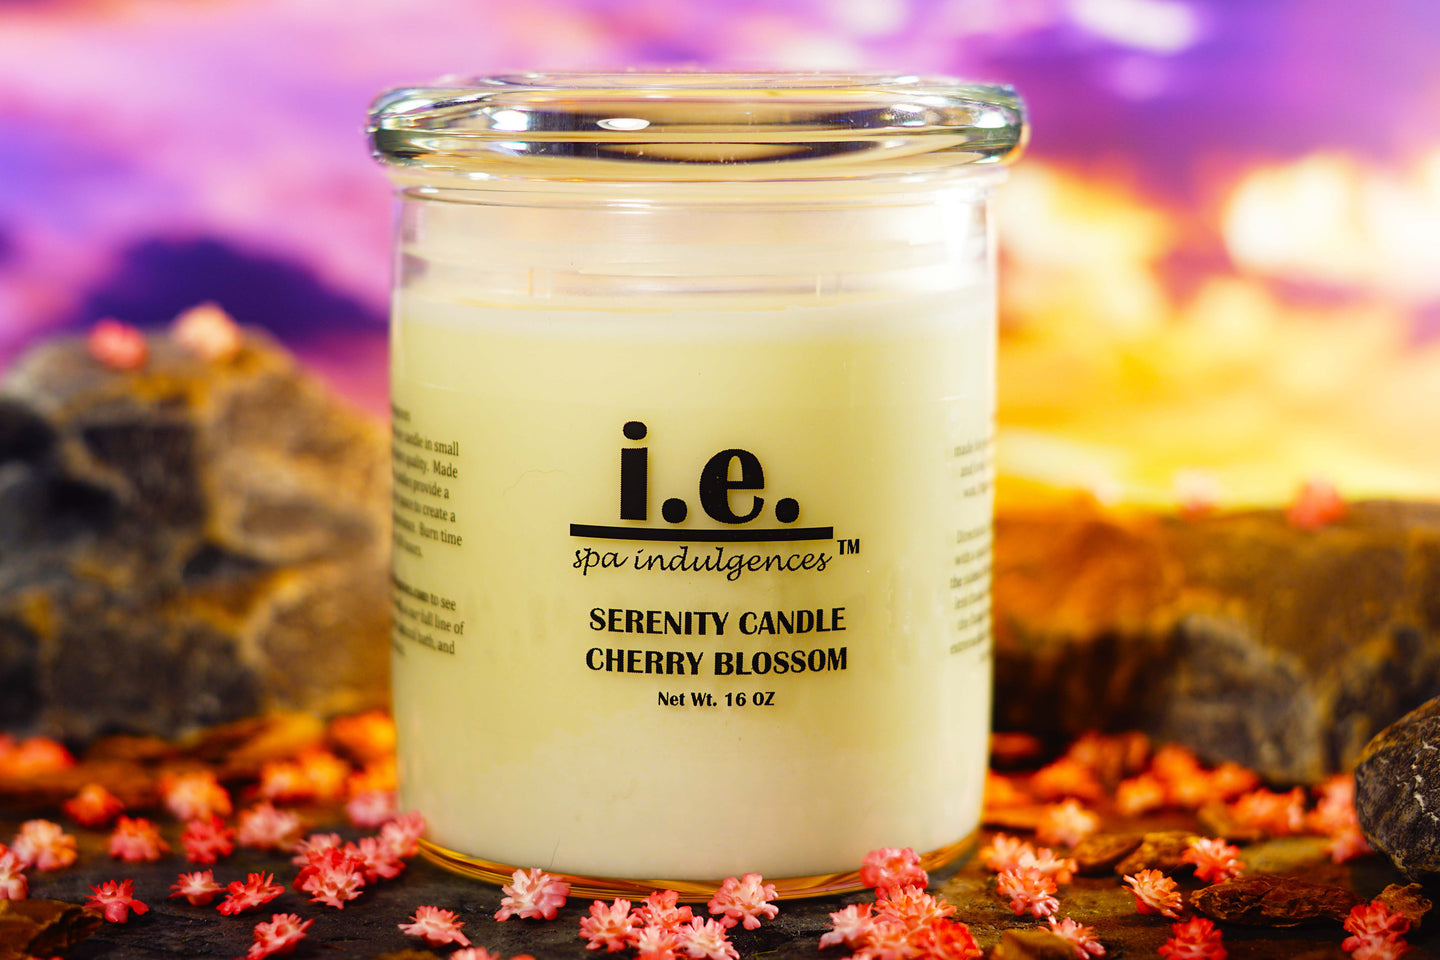 Serenity Candle - Cherry Blossom